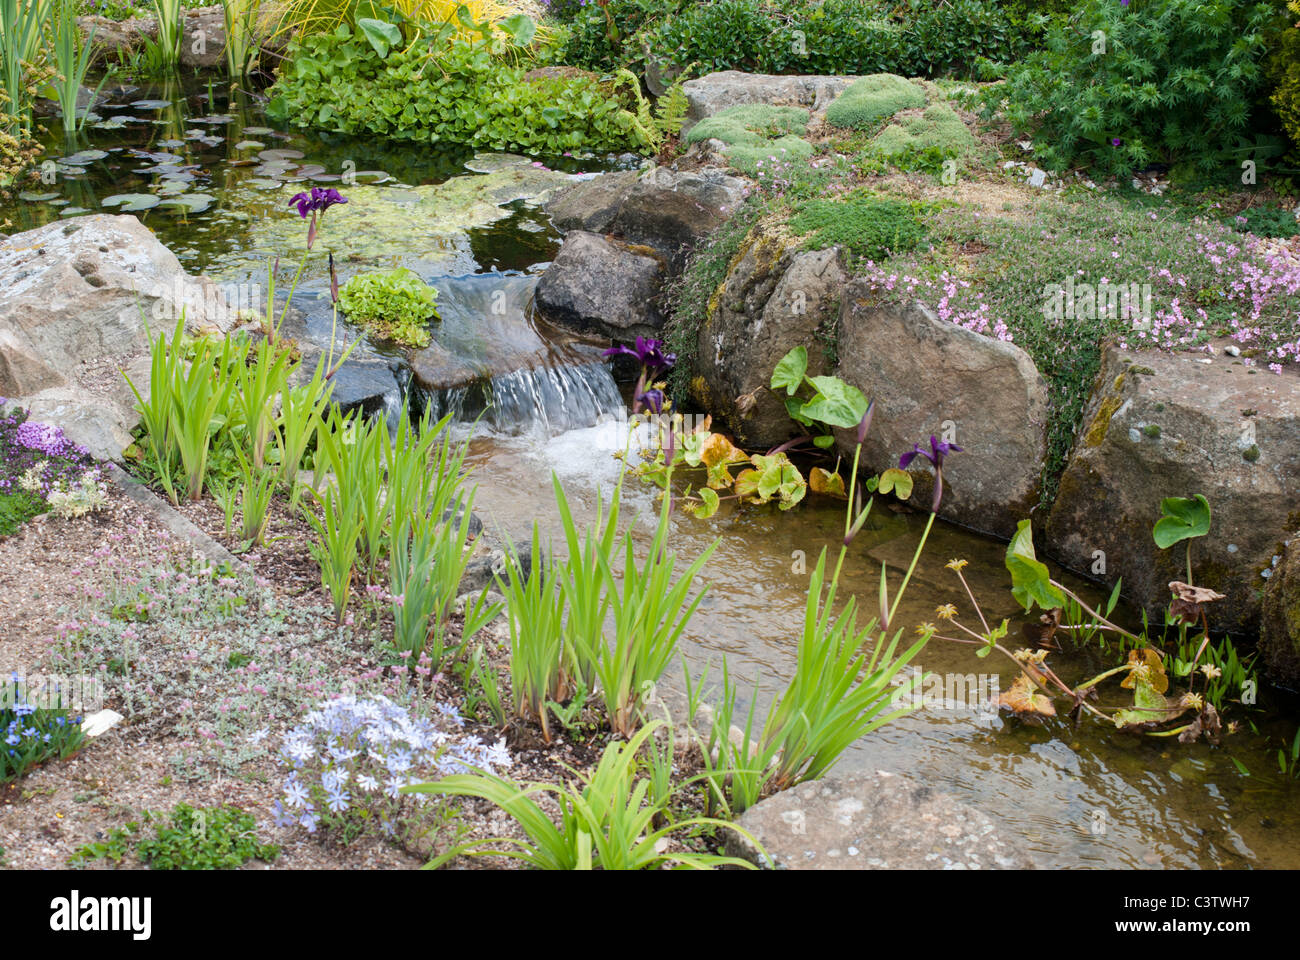 Alpine rock garden with a water feature Stock Photo